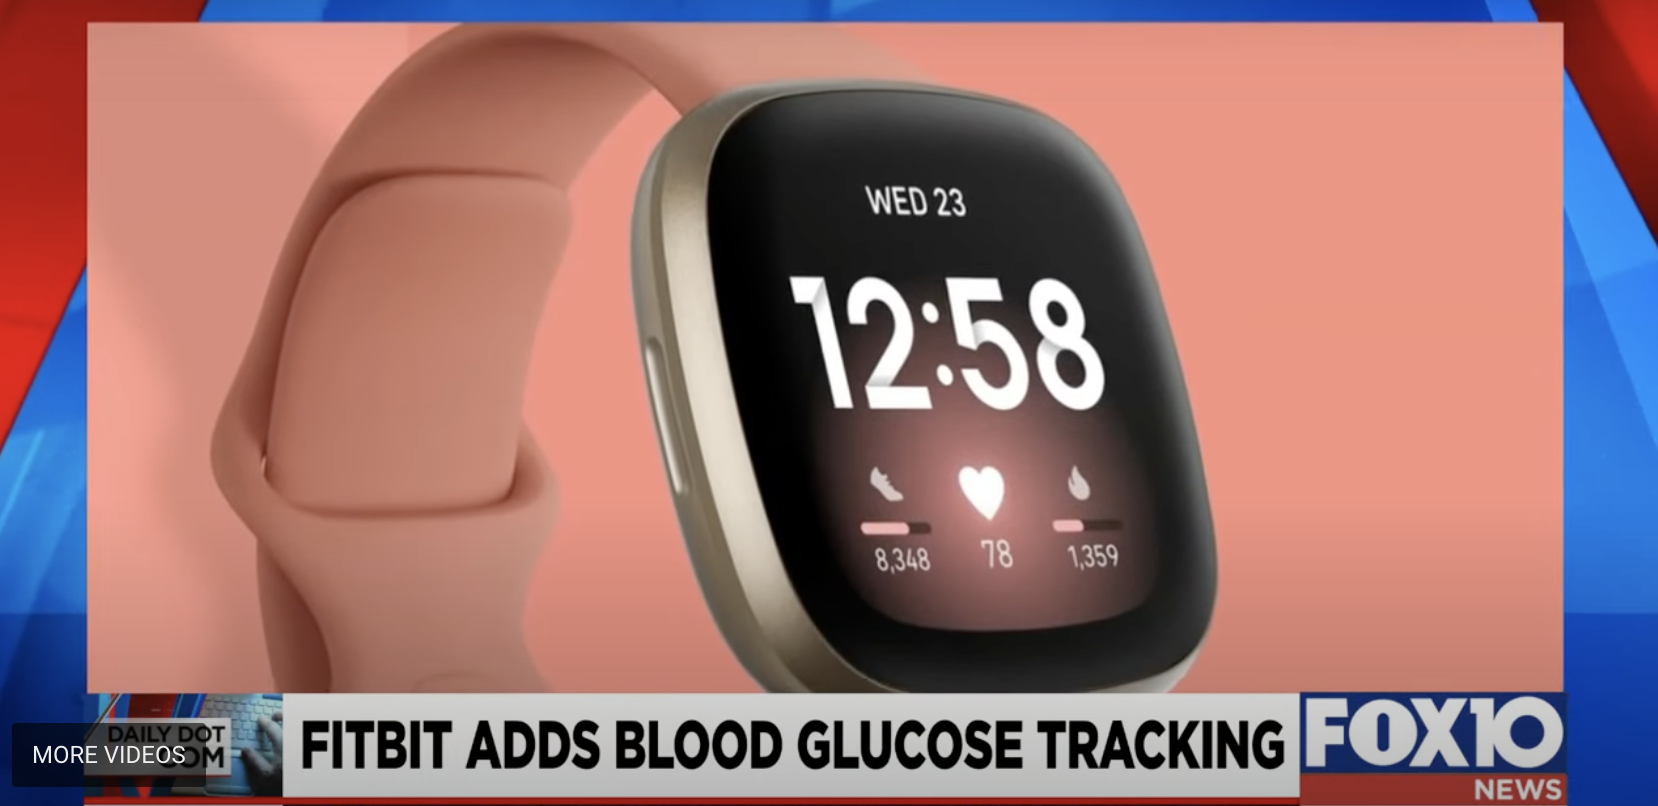 Activity Data from Fitbit Effective in Monitoring Blood Sugar Levels, Experts Say